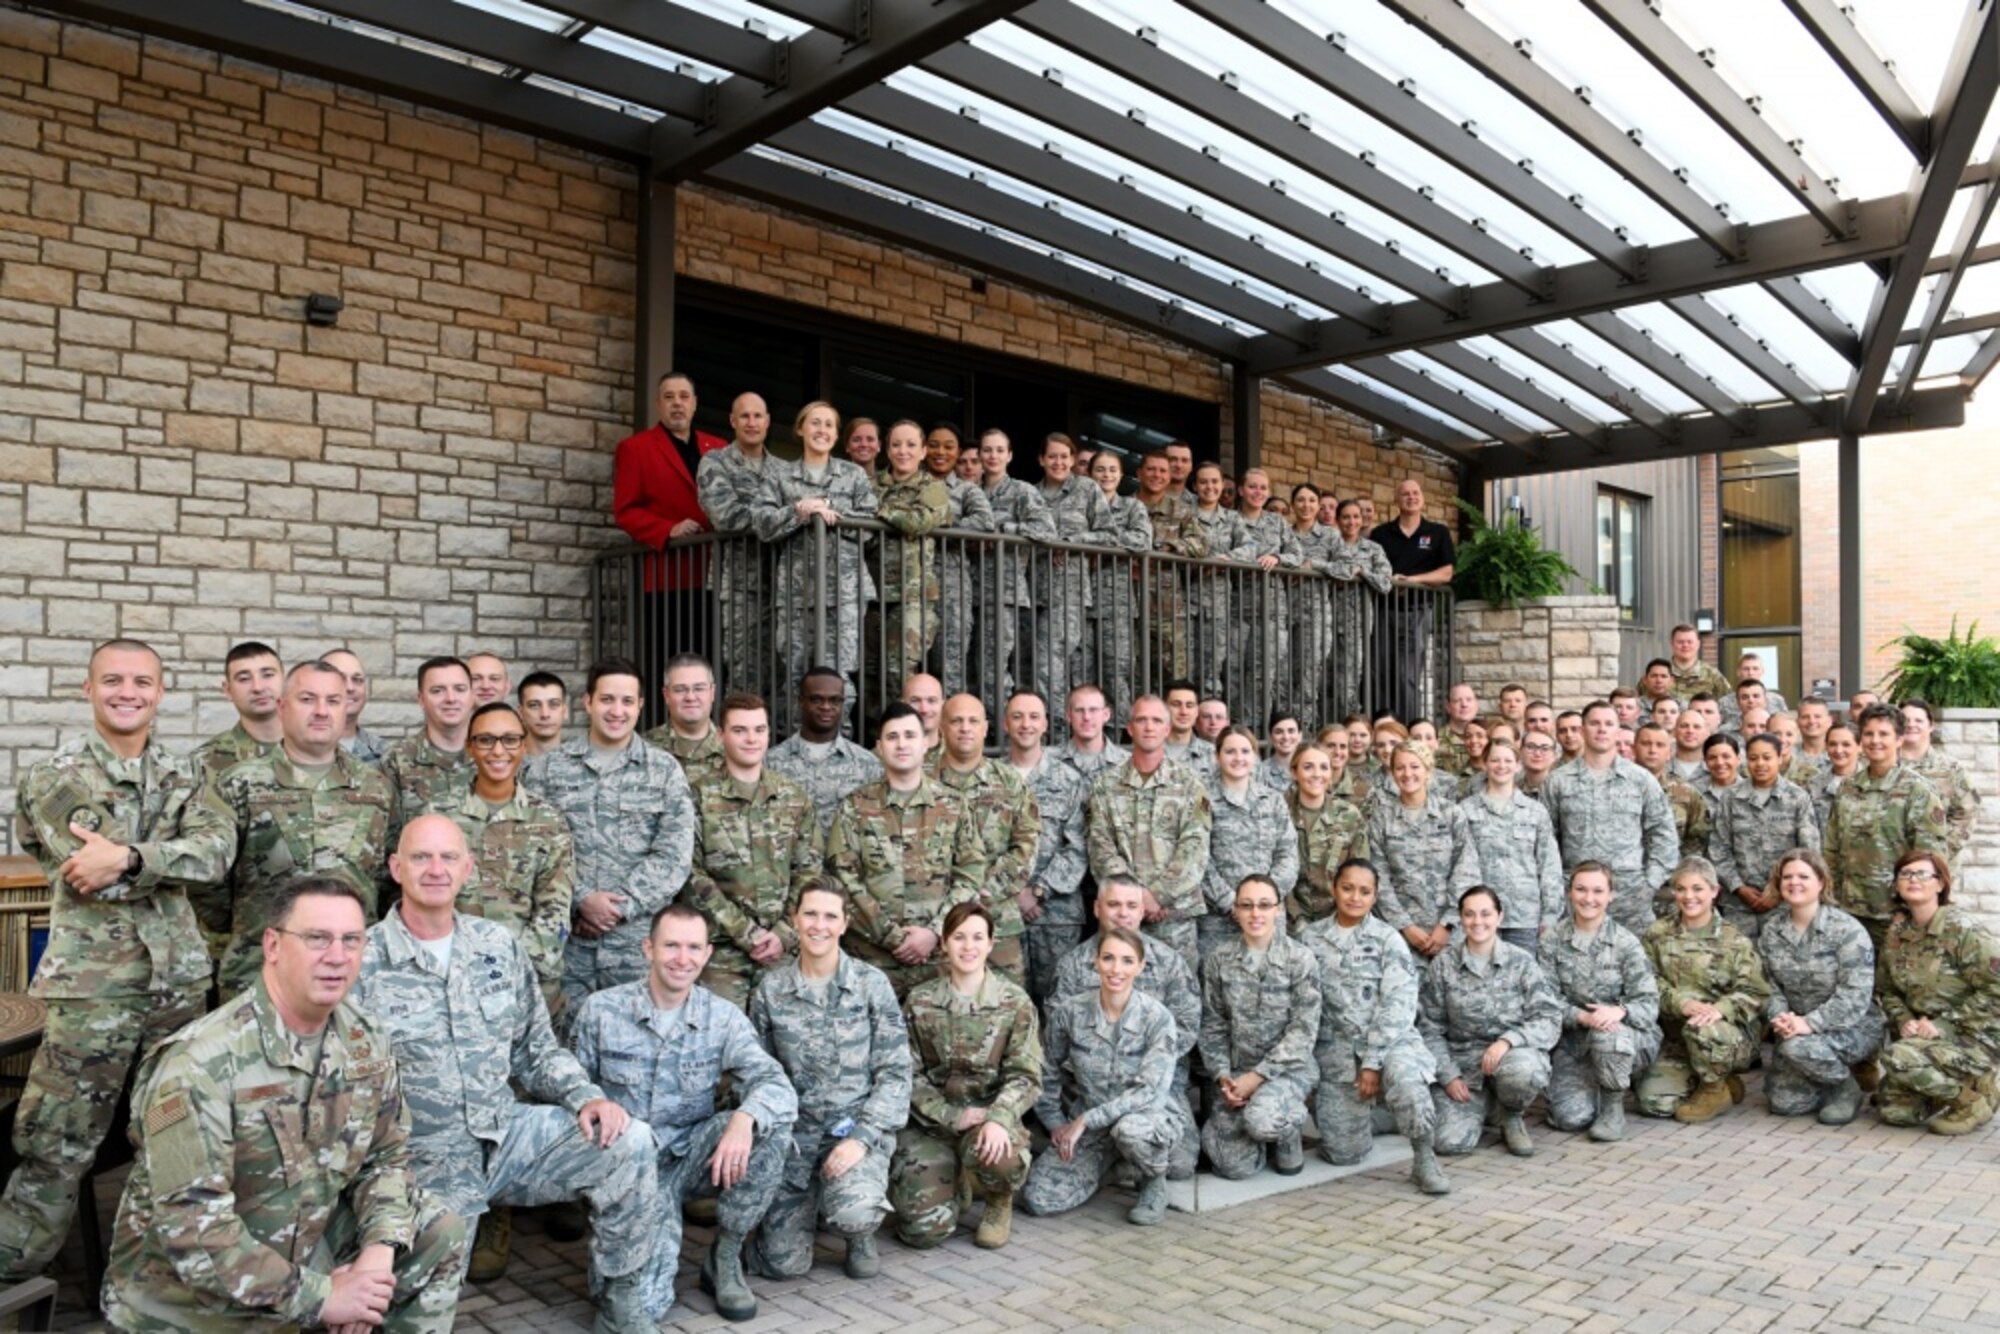 More than 100 Airmen from across Ohio traveled to Youngstown Air Reserve Station to attend the 2nd Annual Ohio Enlisted Leadership Symposium, July 23-25, 2019.